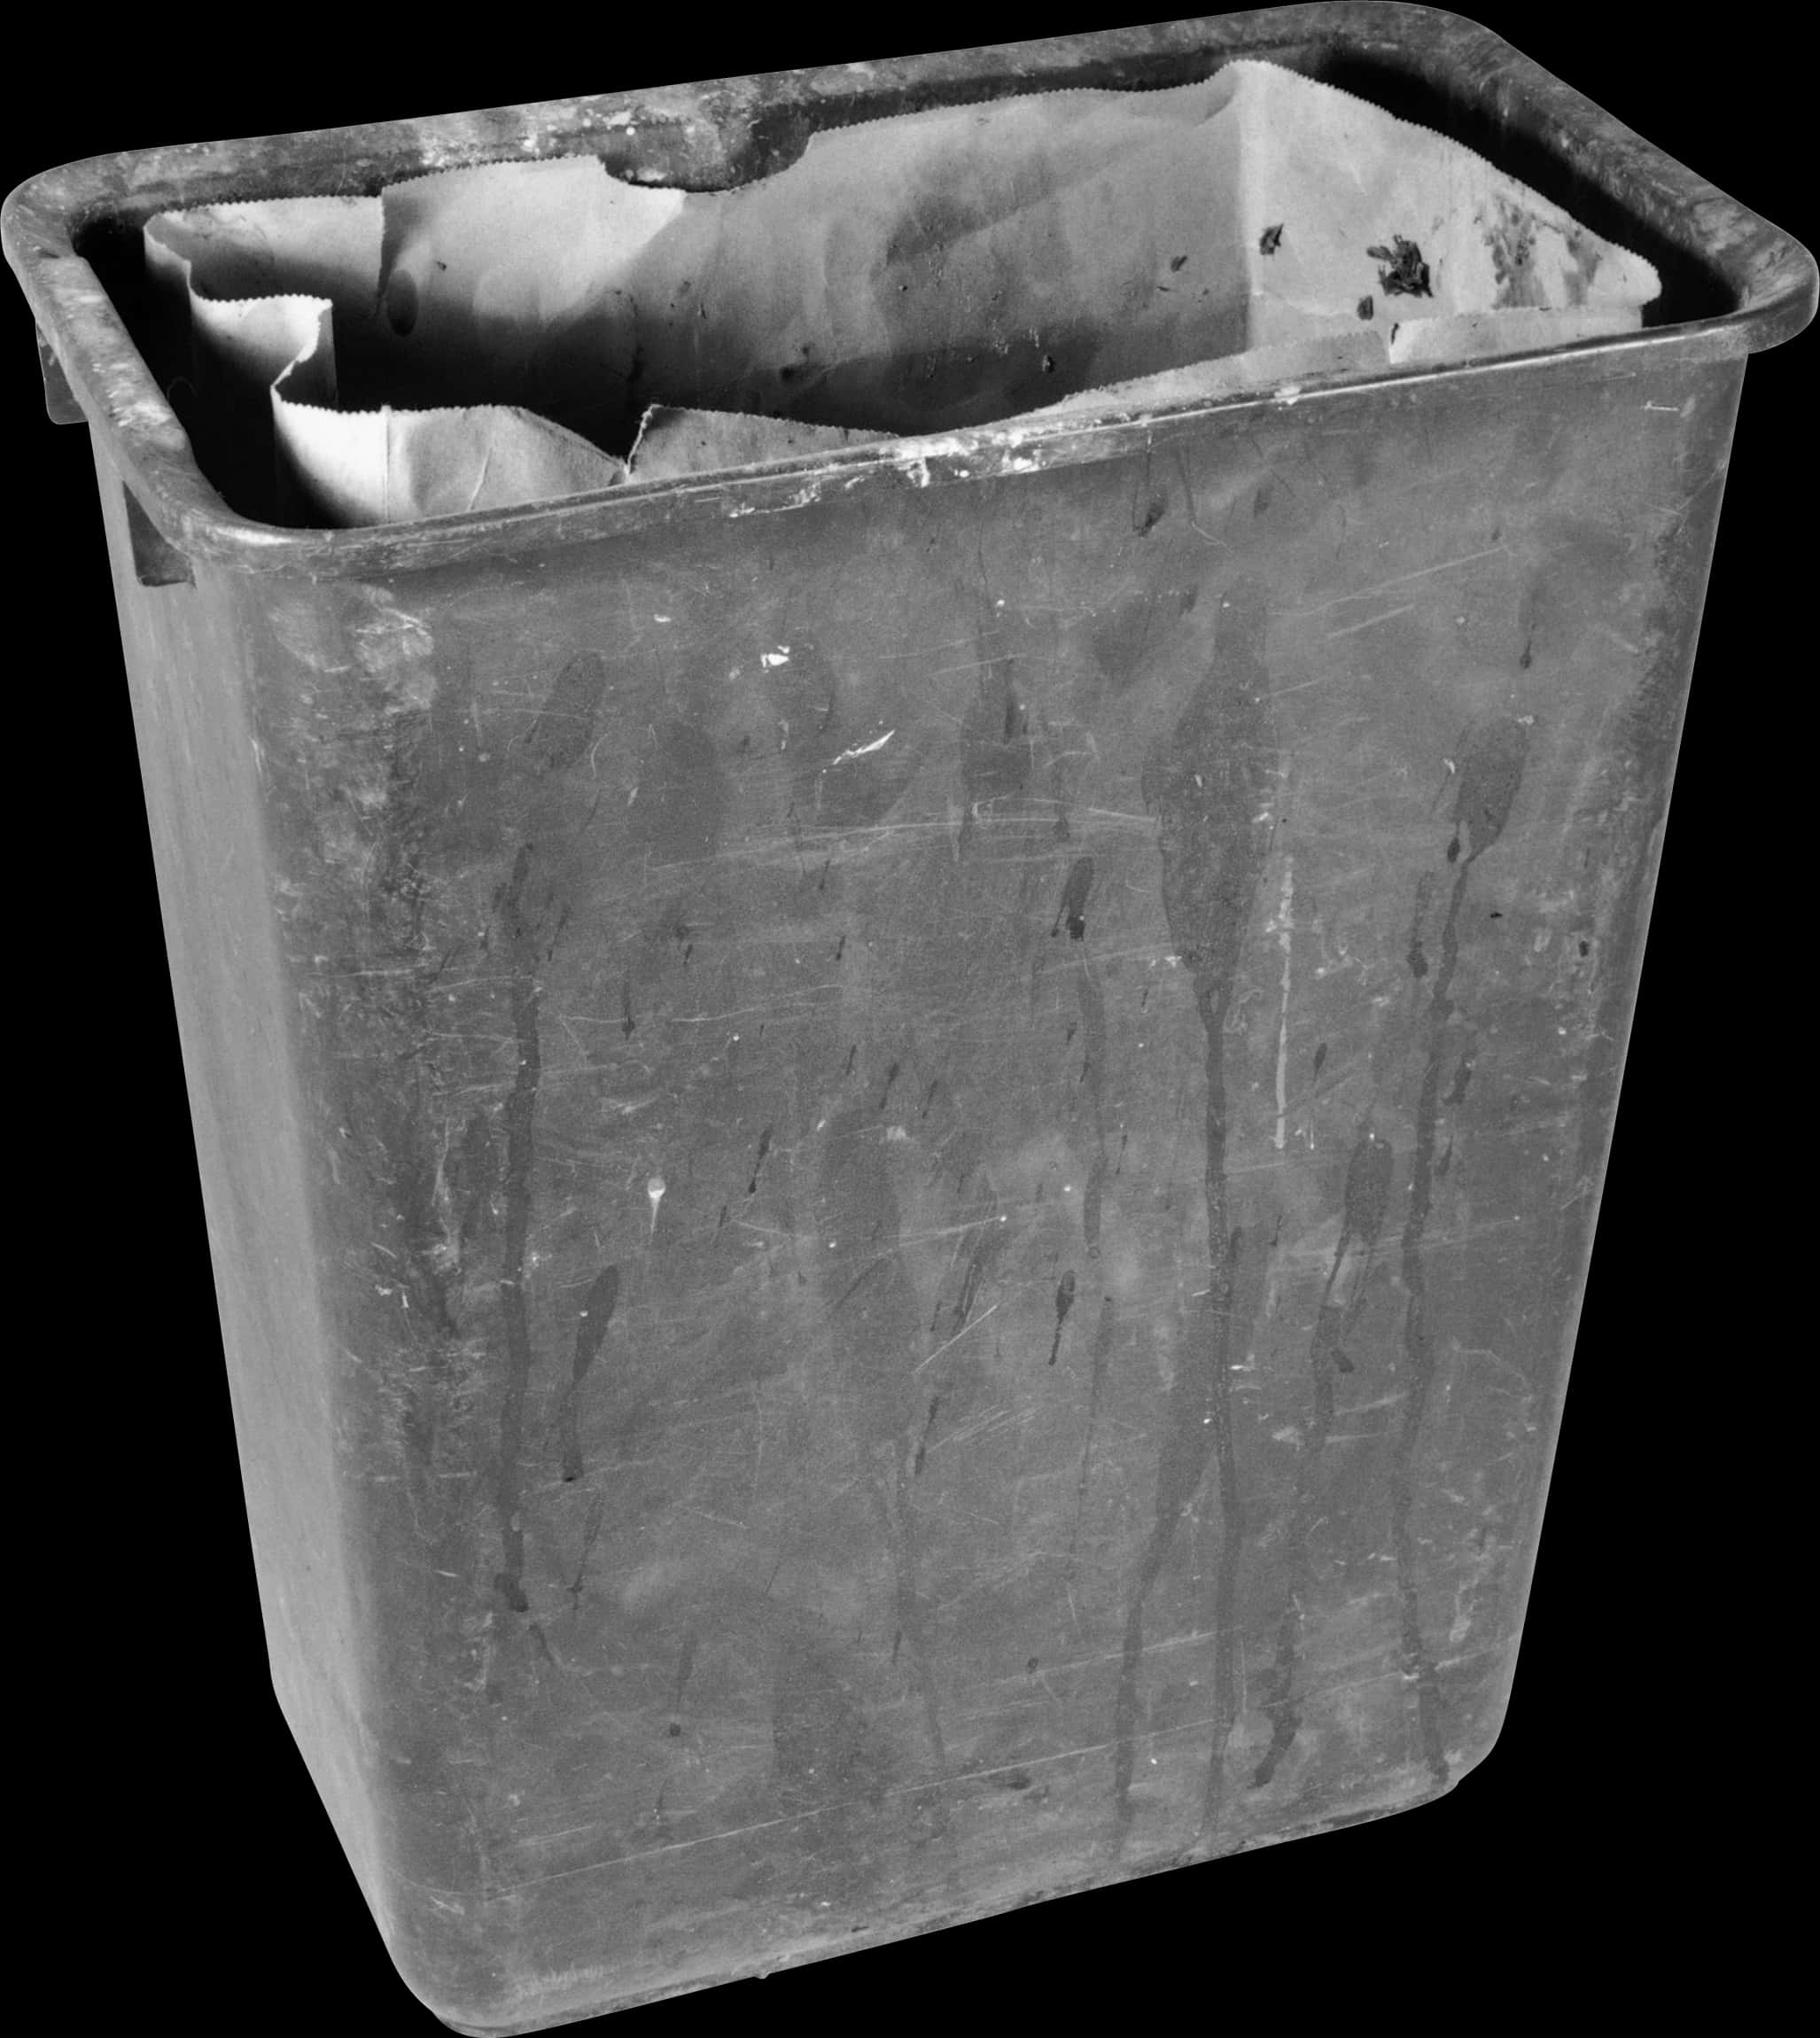 A Close-up Of A Trash Can